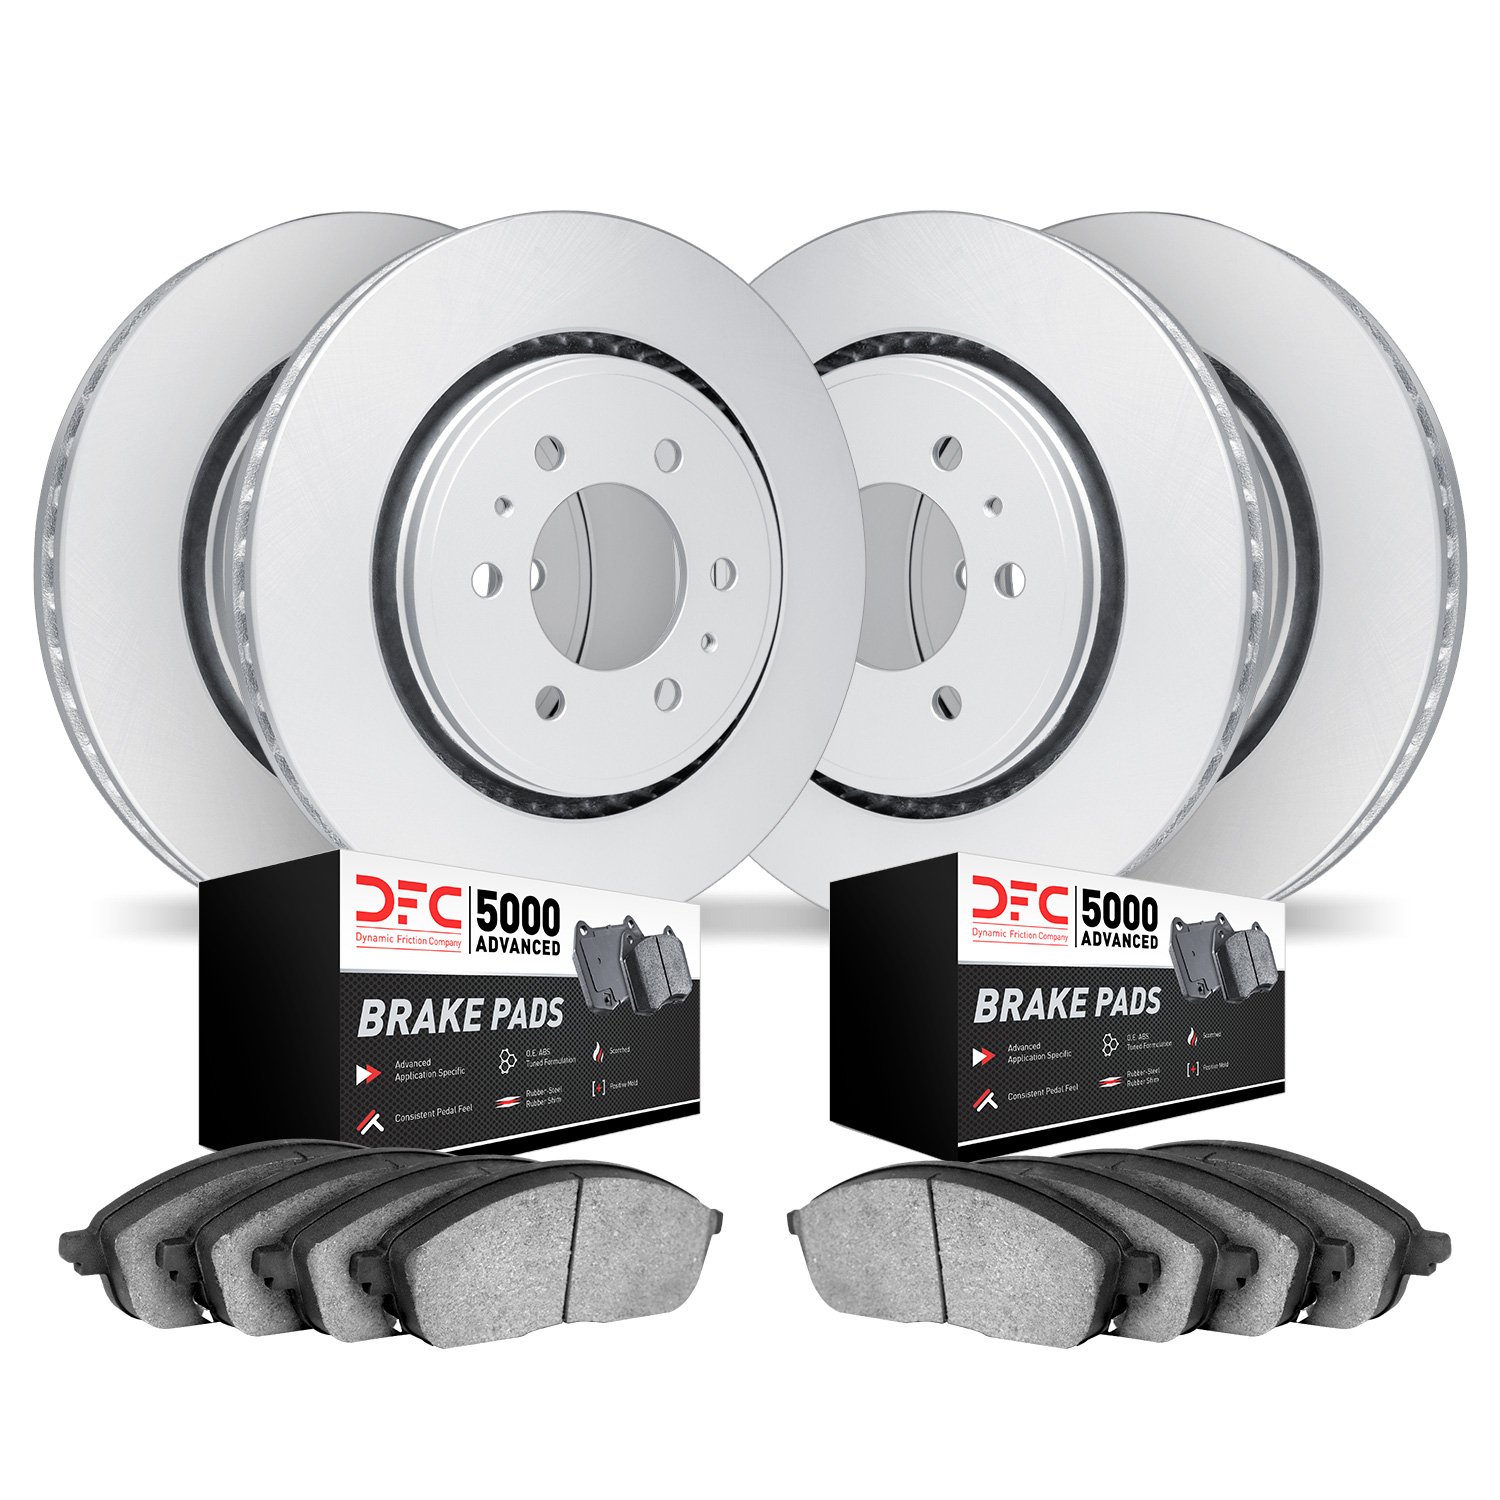 4504-67023 Geospec Brake Rotors w/5000 Advanced Brake Pads Kit, Fits Select Multiple Makes/Models, Position: Front and Rear